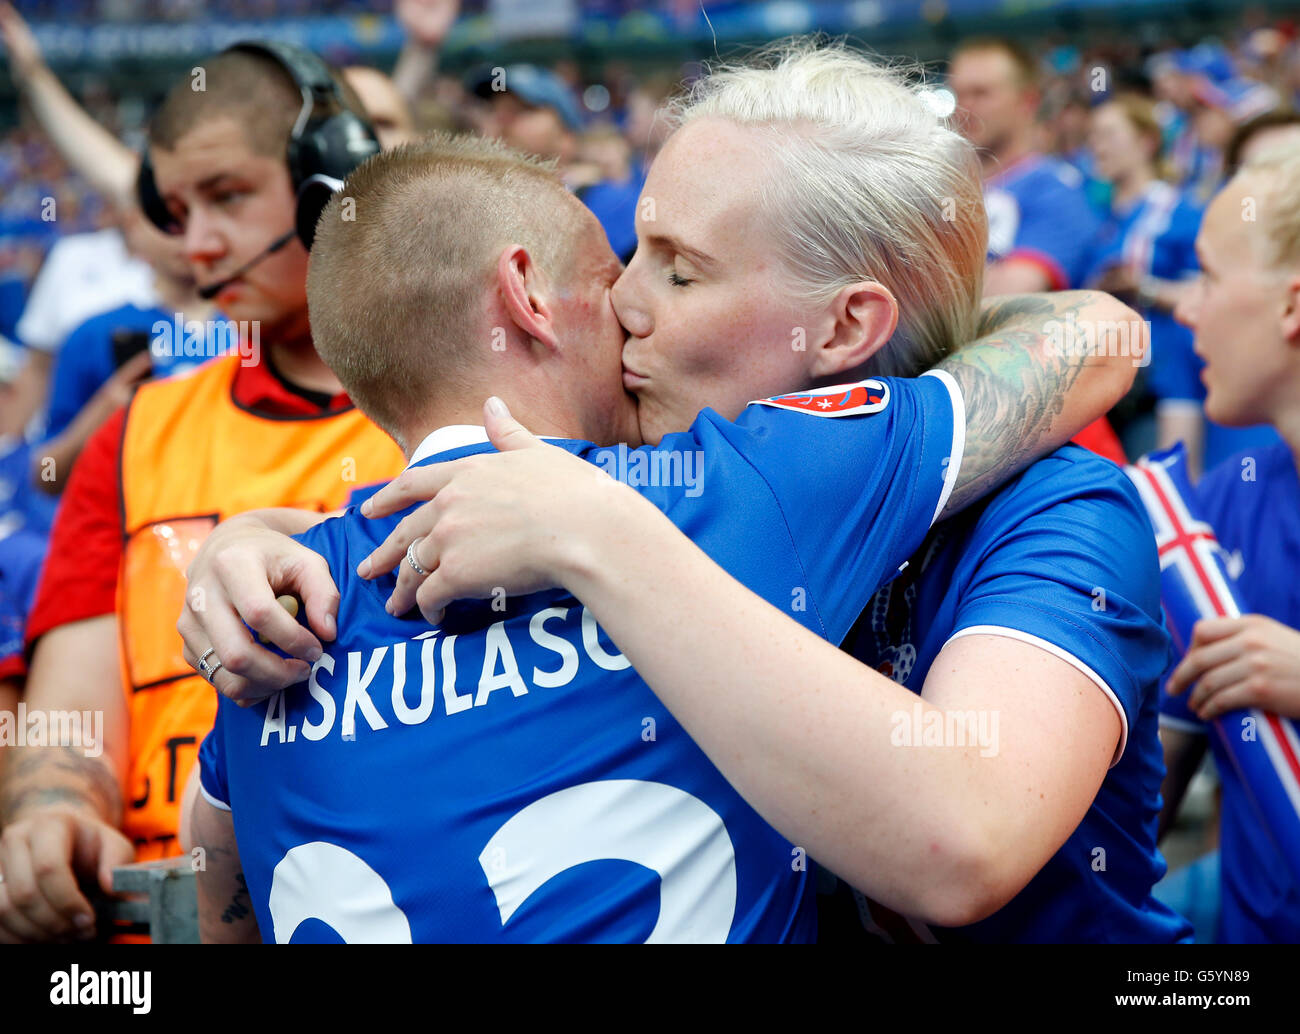 Iceland's Ari Freyr Skulason kisses his partner as he celebrates qualifying for the last 16 round after the Euro 2016, Group F match at the Stade de France, Paris. after qualifying for the last 16 round after the Euro 2016, Group F match at the Stade de France, Paris. Stock Photo